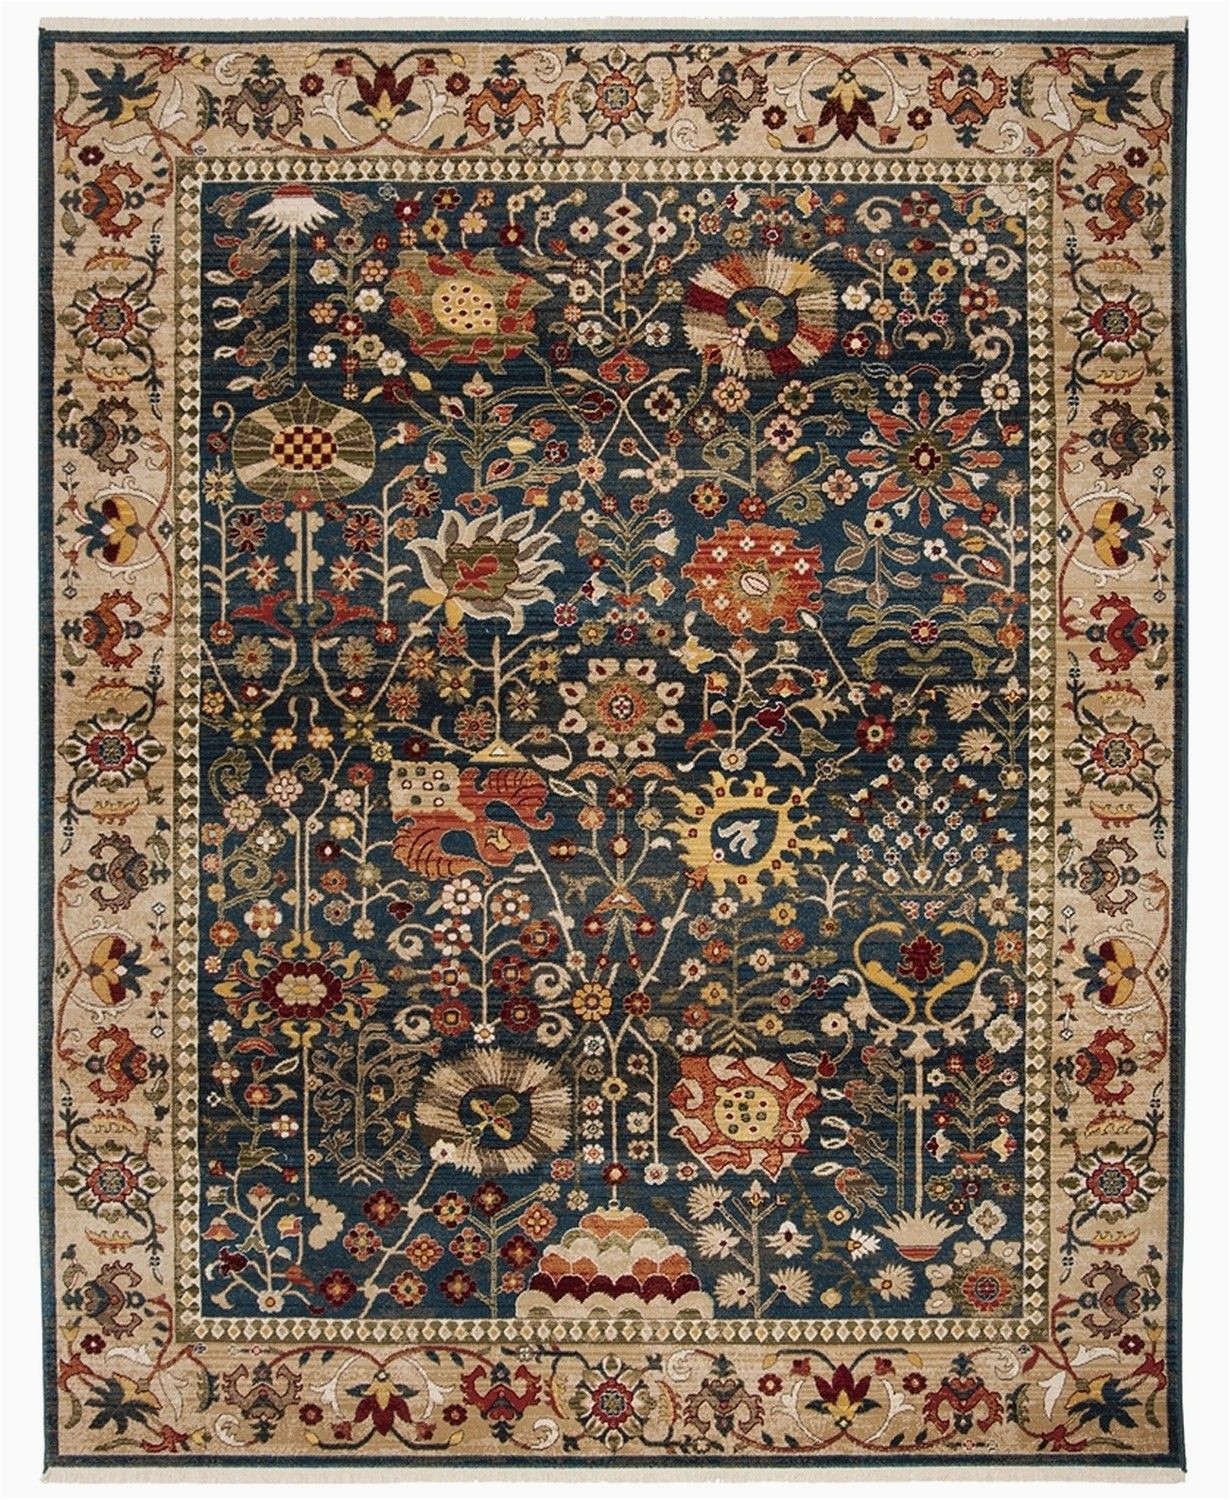 Cheap 10 by 12 area Rugs Safavieh Kashan Blue and Tan 9 X 12 area Rug & Reviews